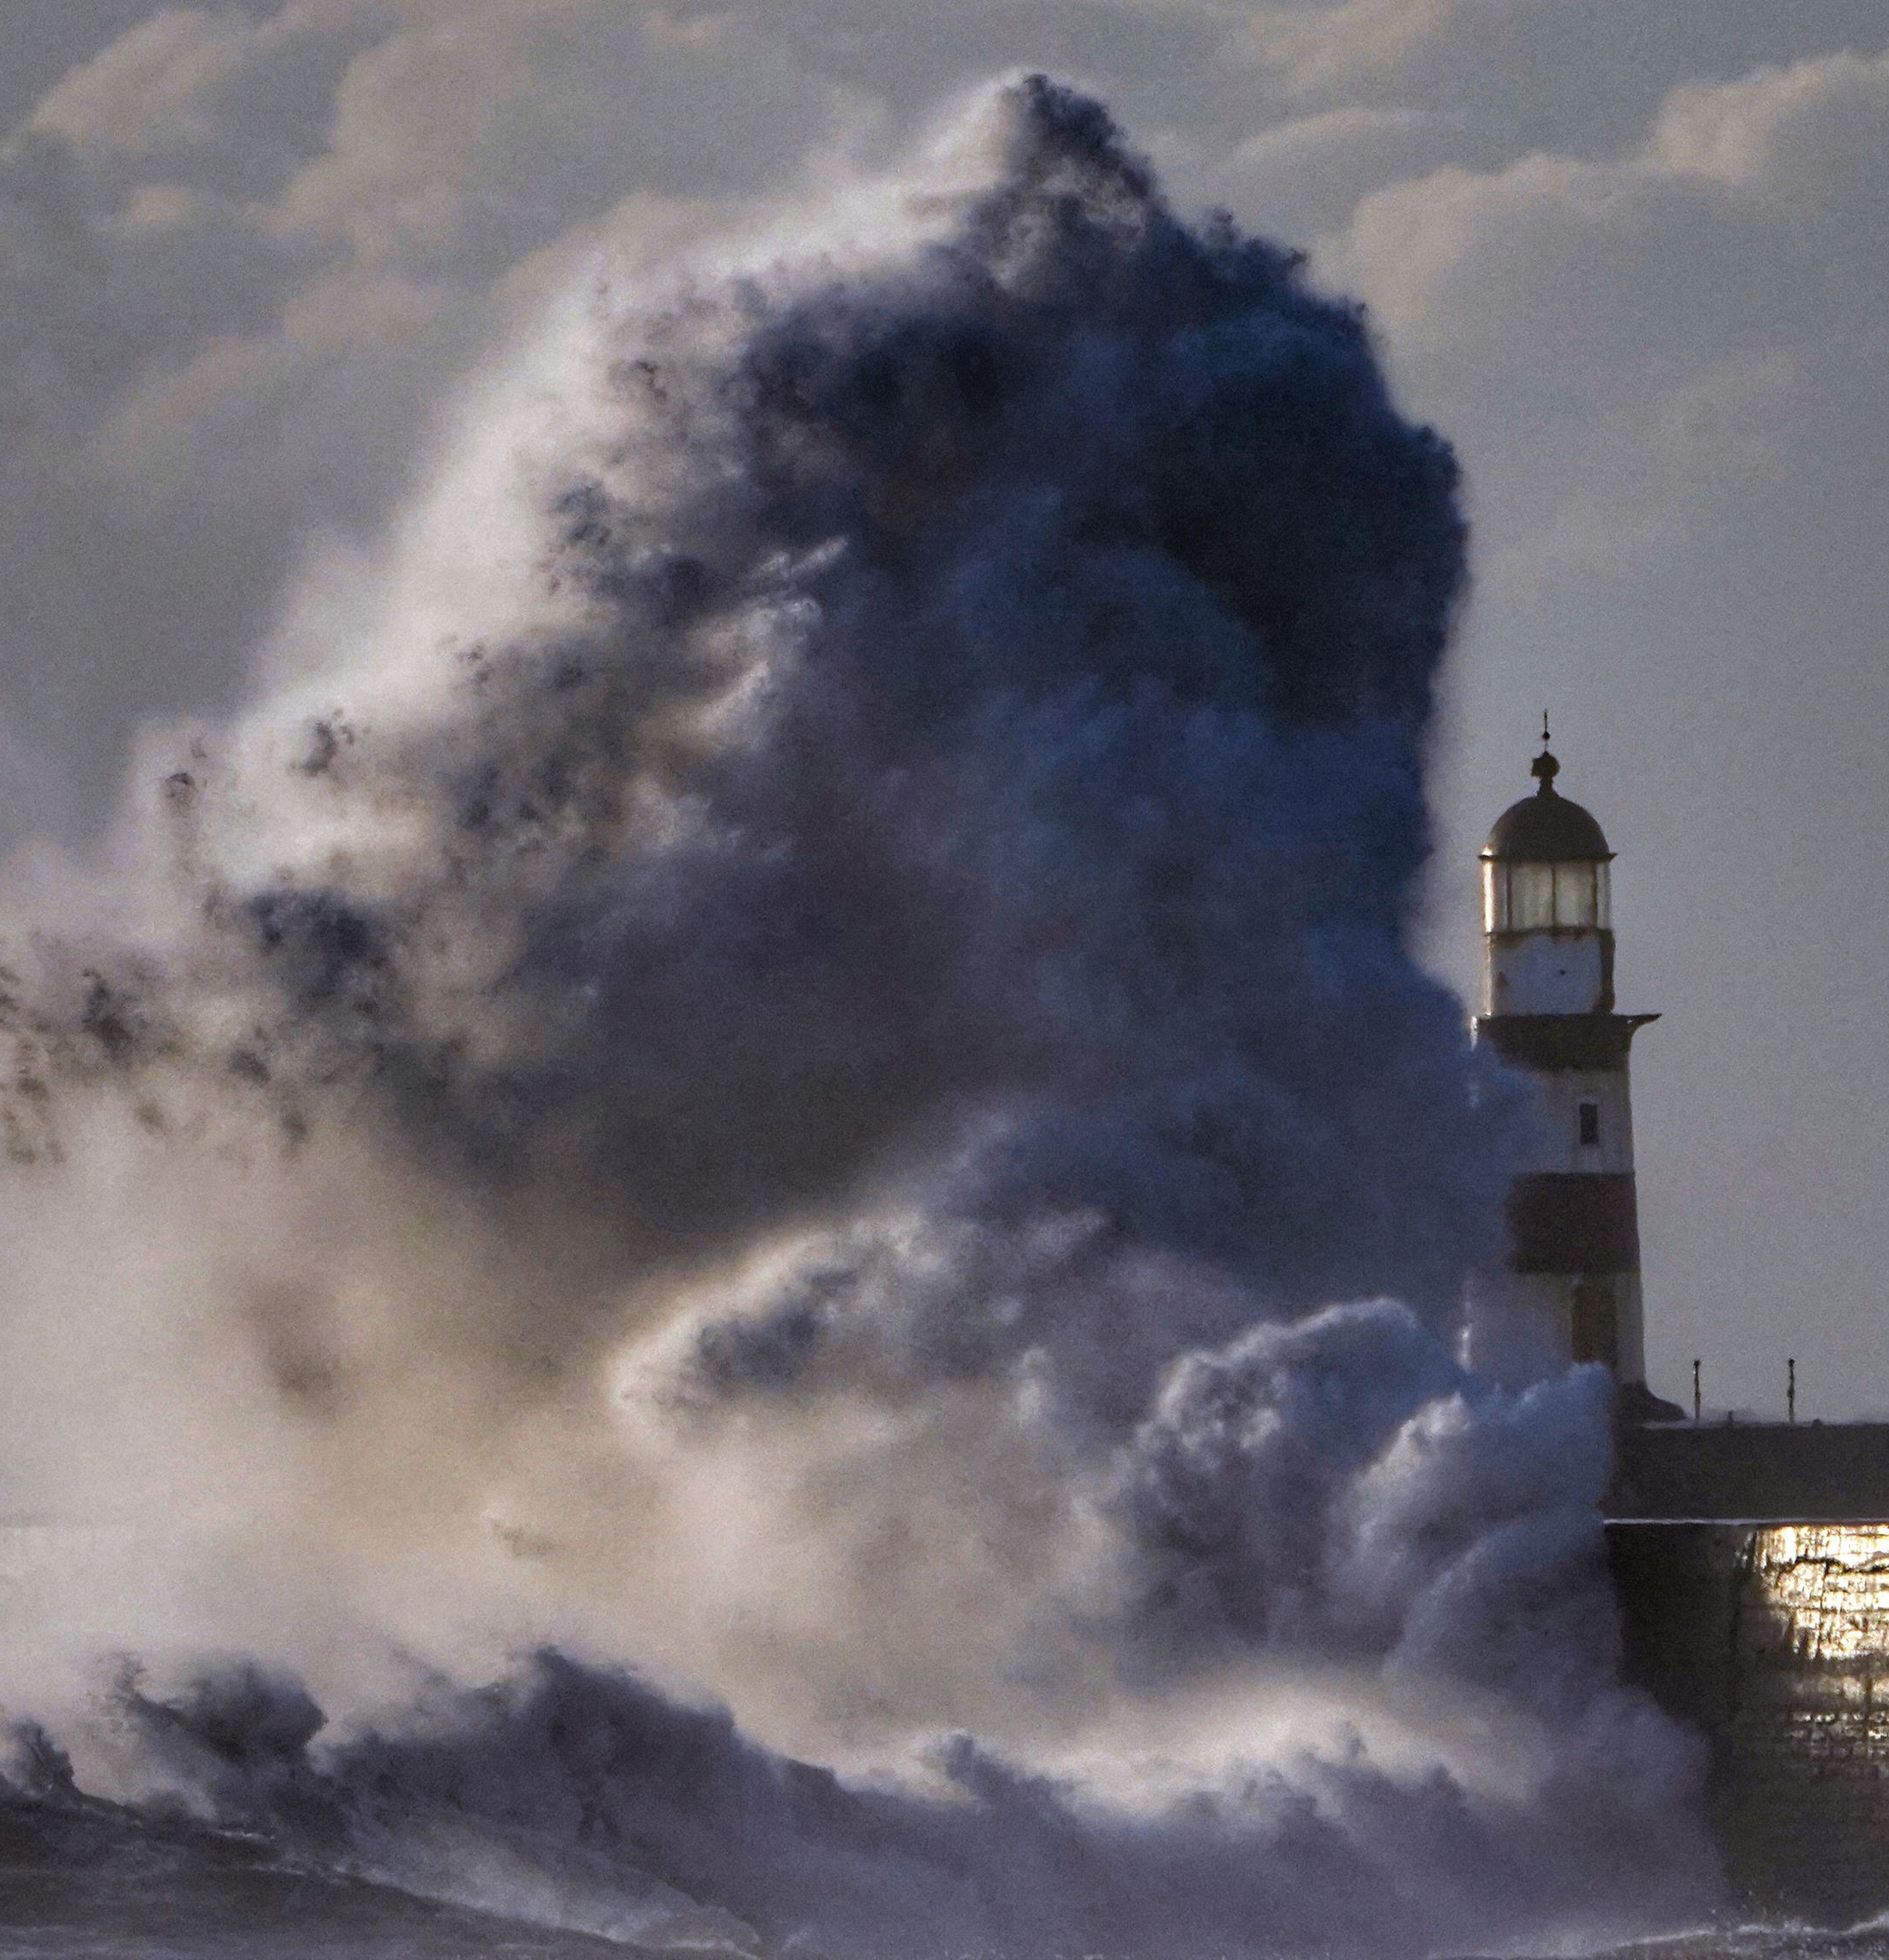 Waves crash over the walls next to Seaham Lighthouse in Durham Picture: OWEN HUMPHREYS/PA.